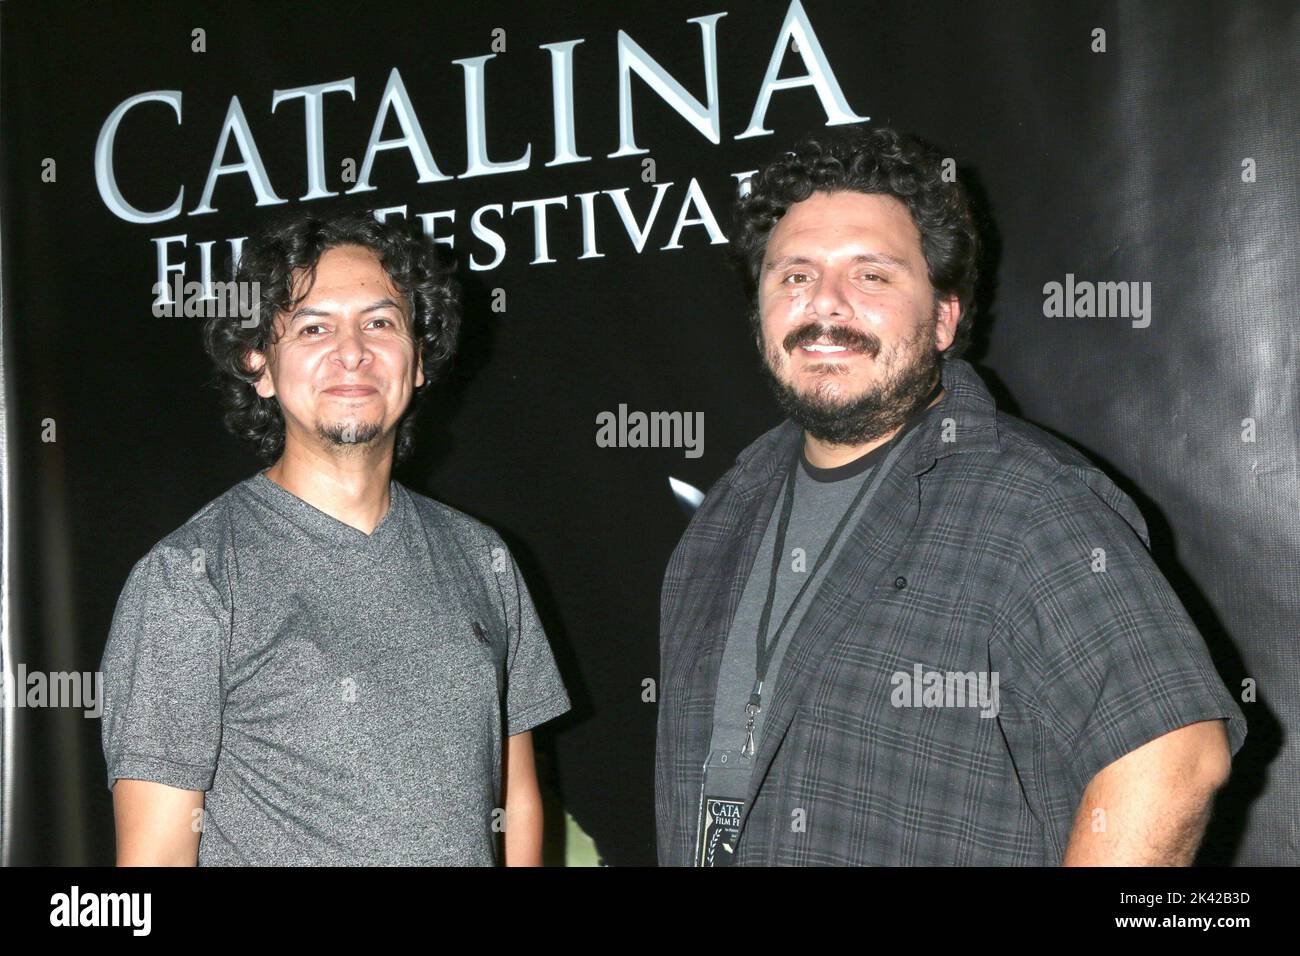 Long Beach, CA. 22nd Sep, 2022. Ivan Gomez, Jose Angel Paredes Rios at arrivals for Catalina Film Festival 2022 - THU, Scottish Rite Event Center, Long Beach, CA September 22, 2022. Credit: Priscilla Grant/Everett Collection/Alamy Live News Stock Photo